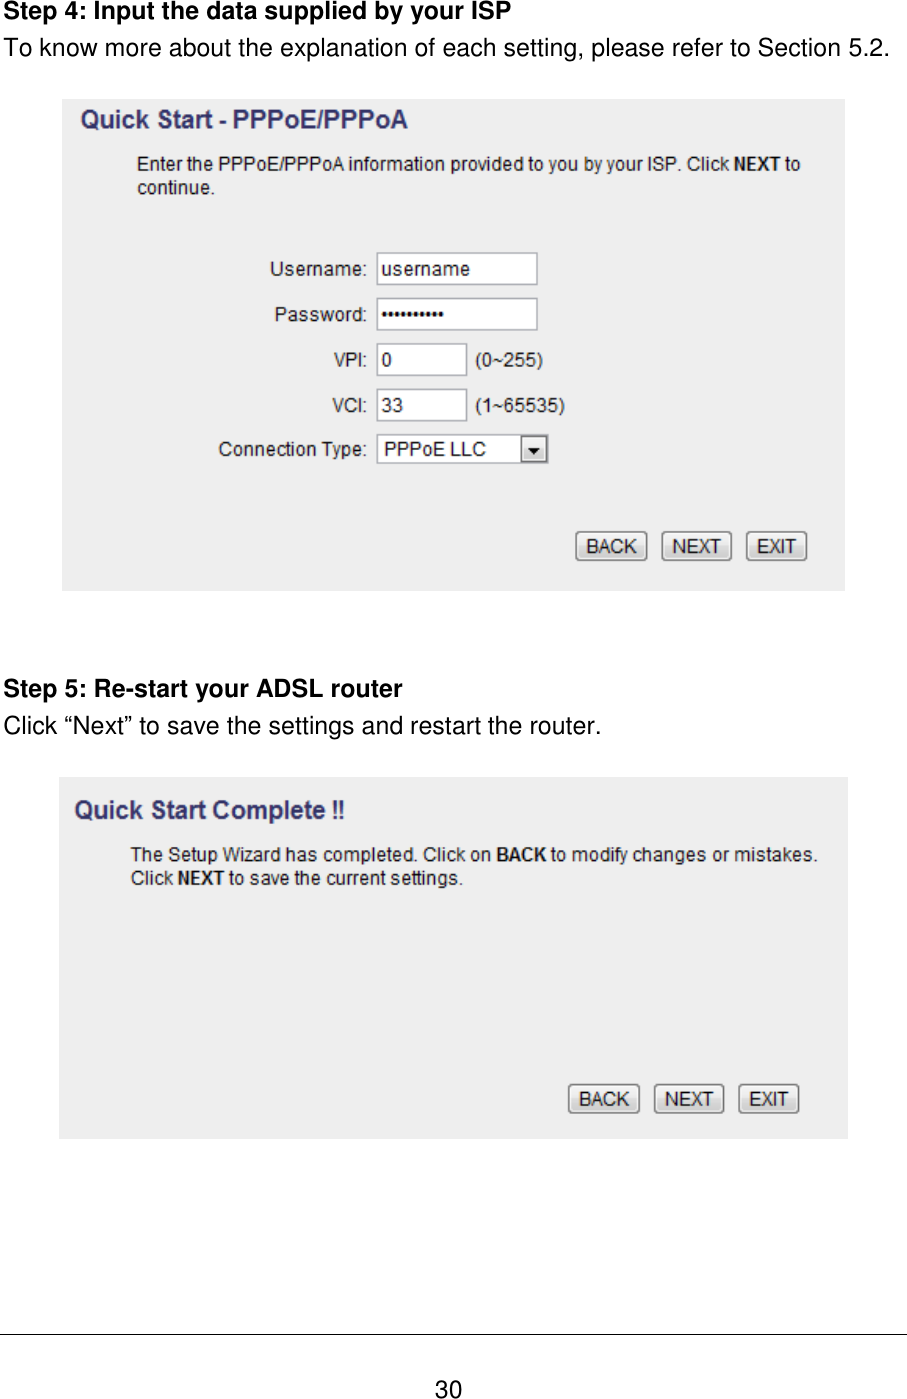   30 Step 4: Input the data supplied by your ISP To know more about the explanation of each setting, please refer to Section 5.2.     Step 5: Re-start your ADSL router Click “Next” to save the settings and restart the router.    